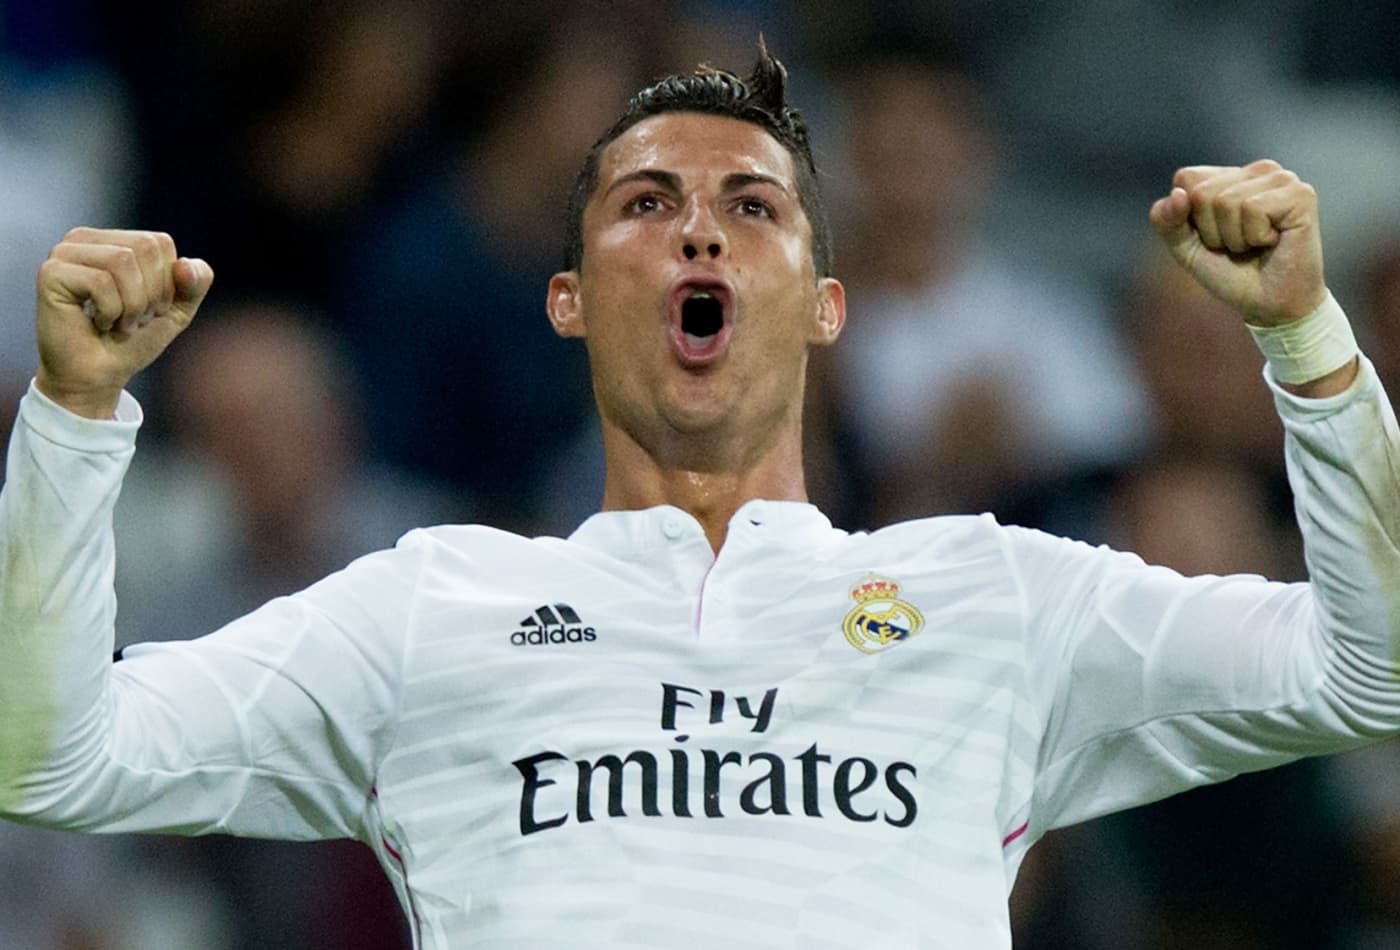 The 8 highest paid soccer players in the world